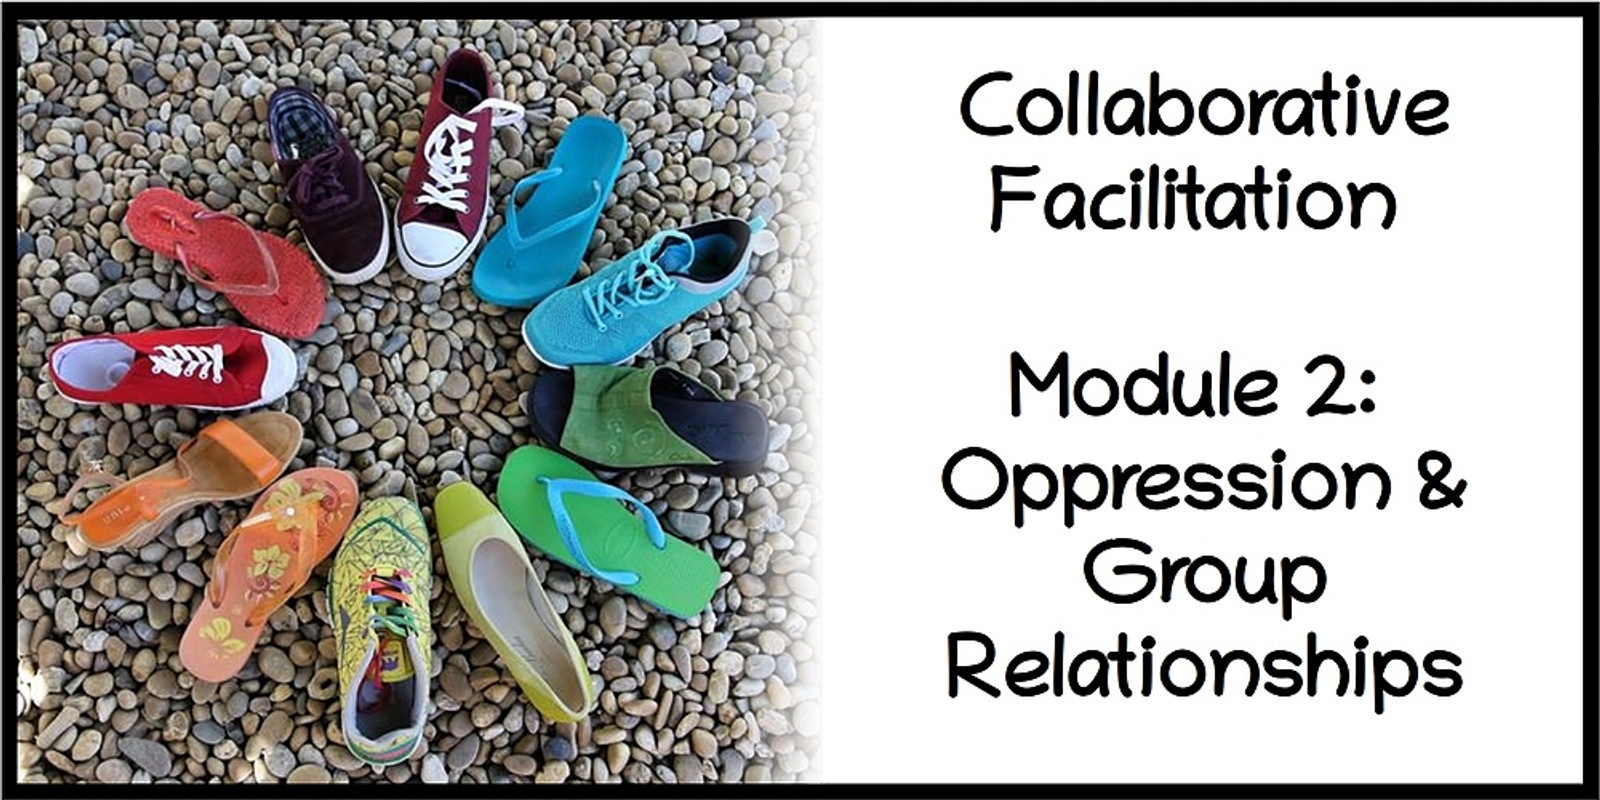 Banner image for Collaborative Facilitation Module 2: Oppression & Group Relationships - 9 March 2023